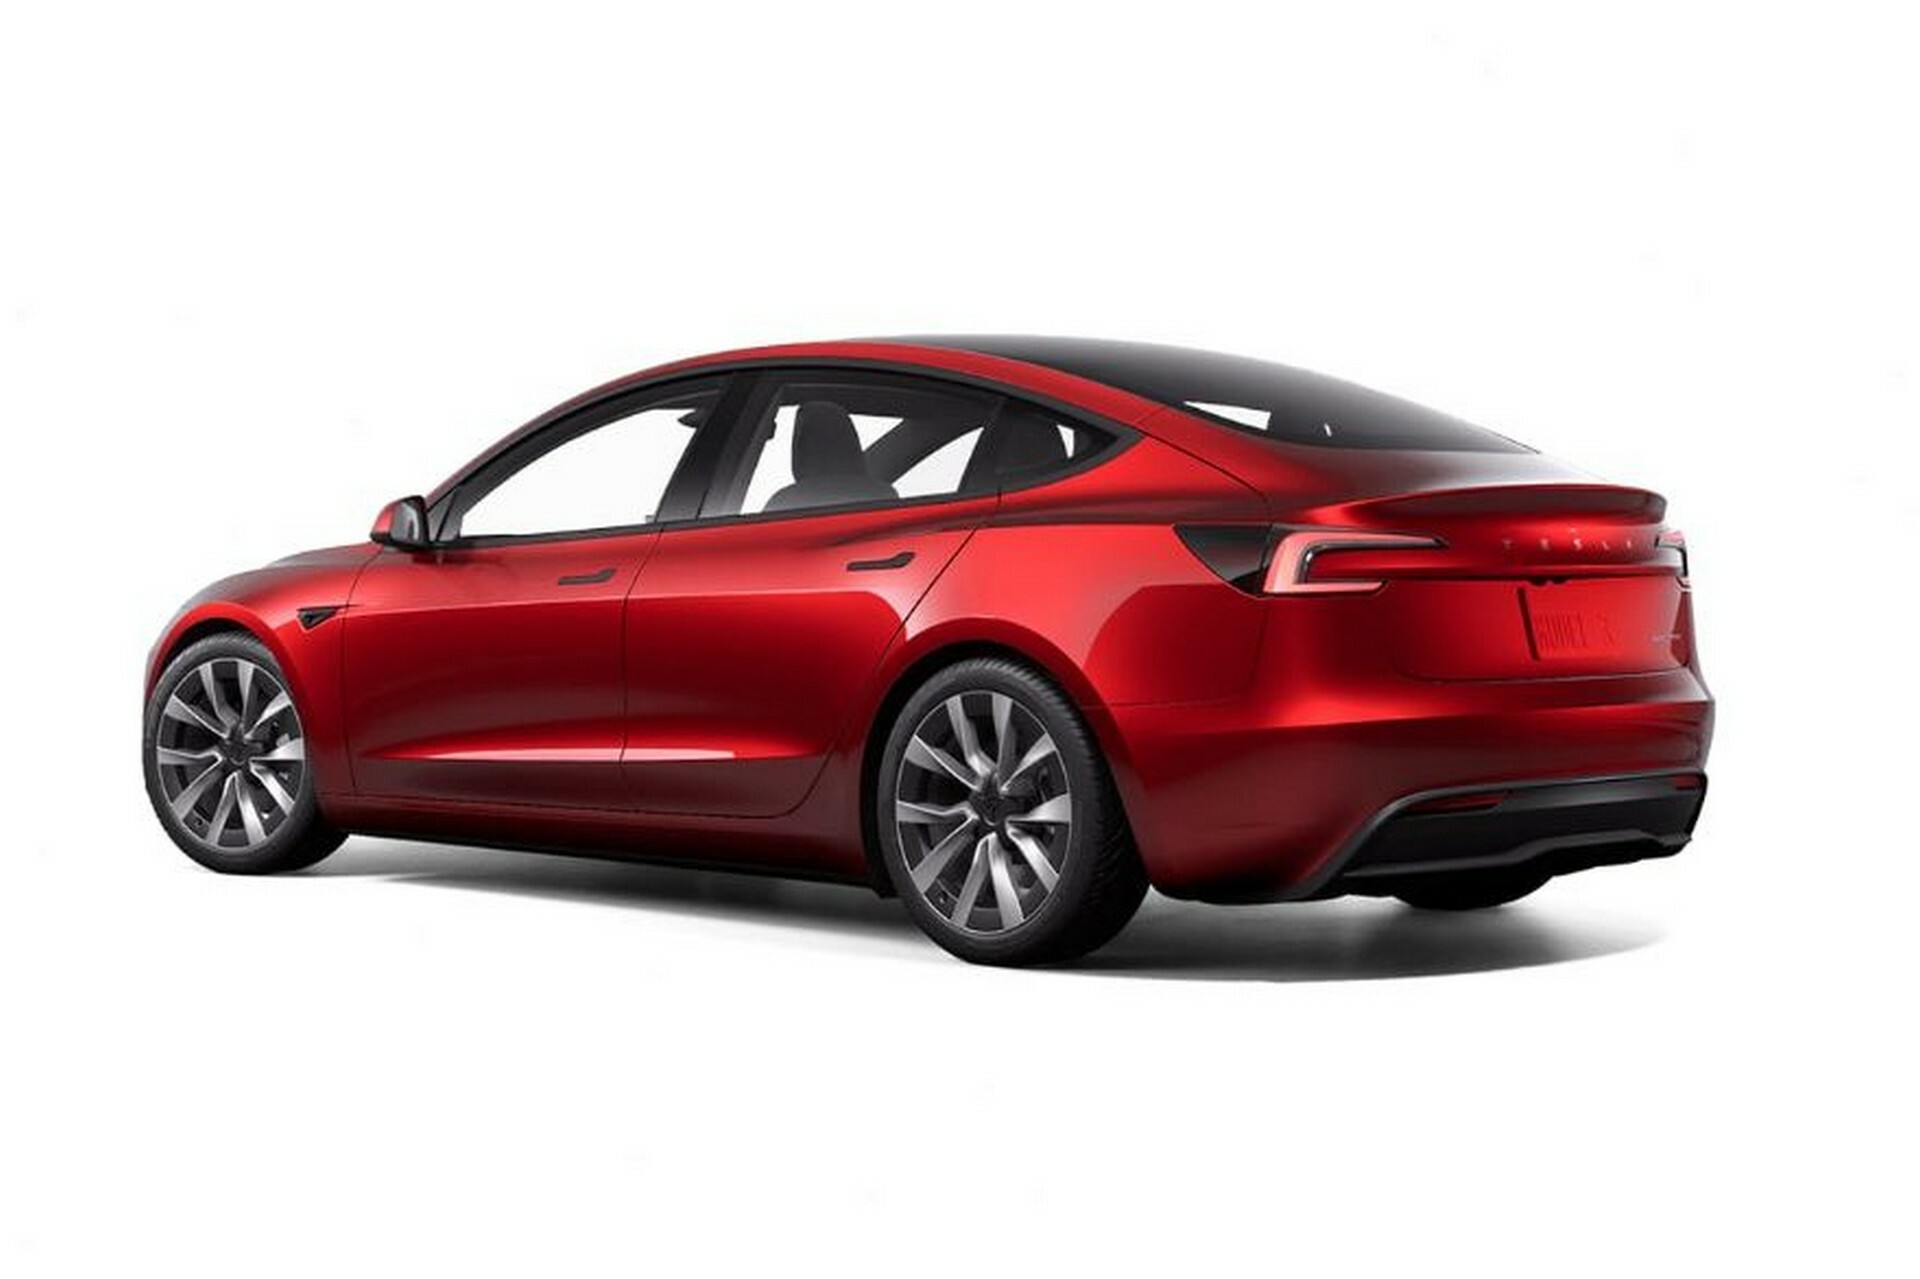 Guide To Ordering a New Tesla Model 3 - How To Pick The Right